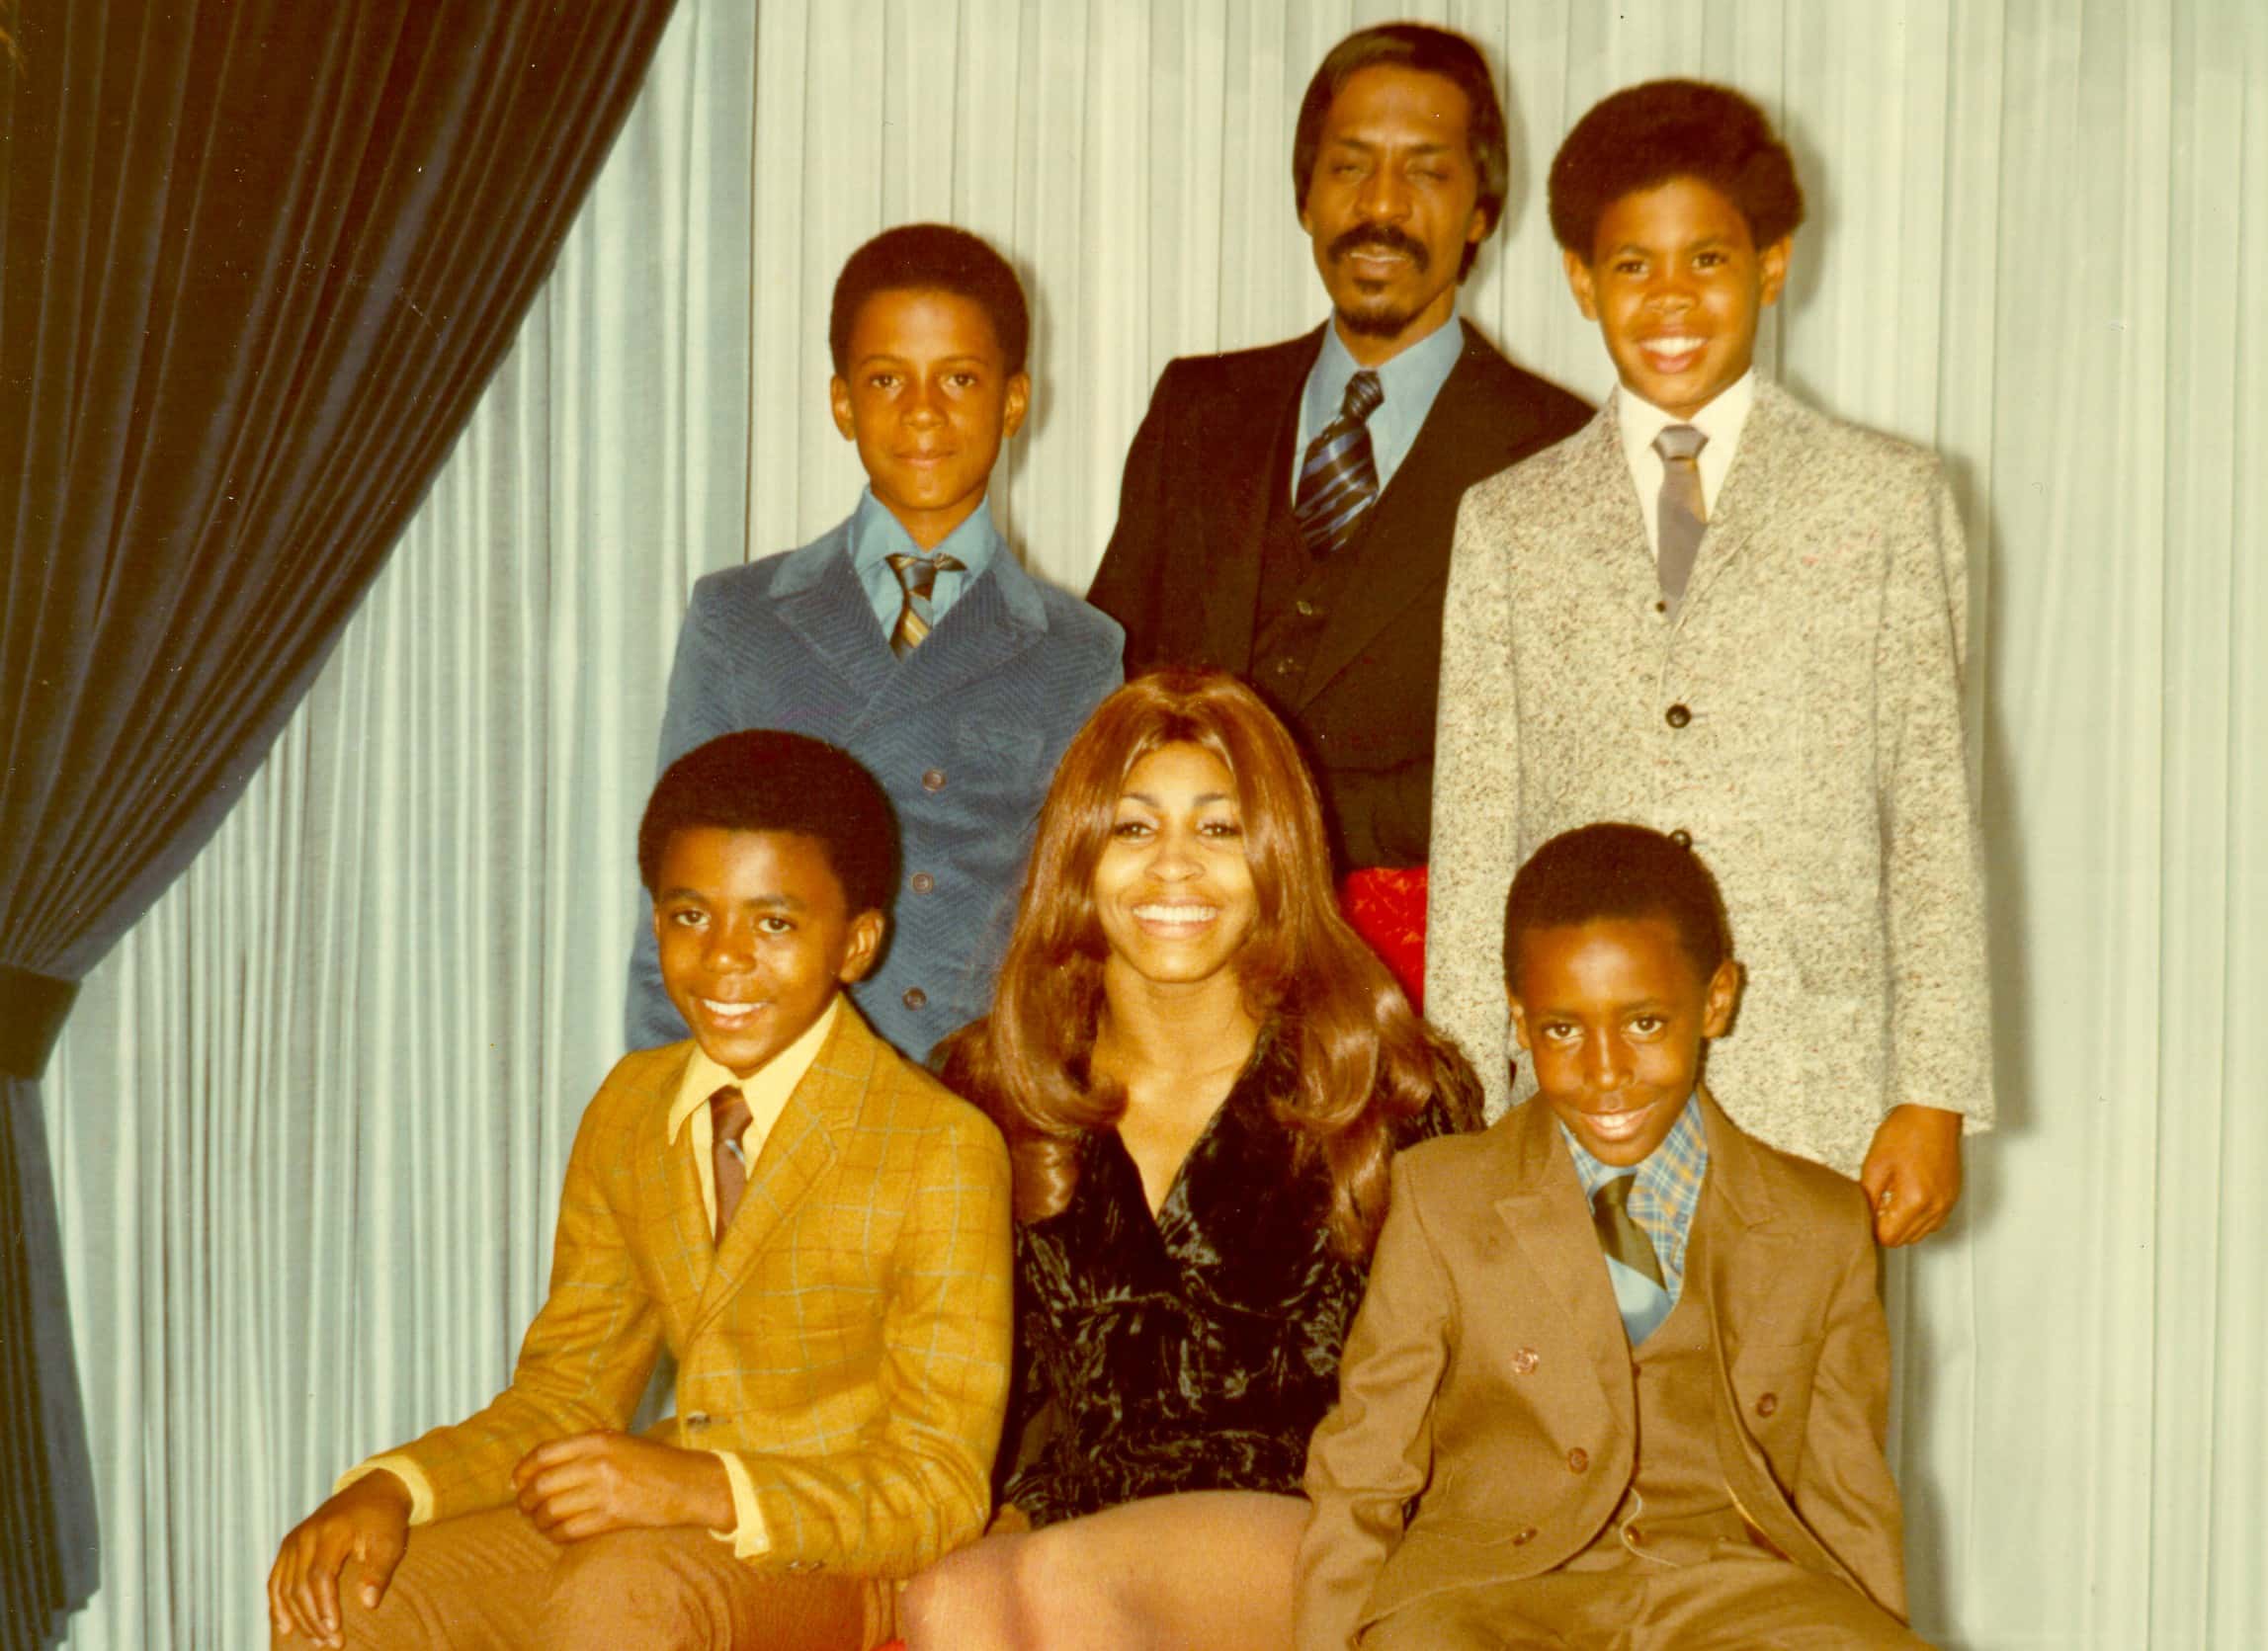 <p>Tina and Ike had a son, Ronnie, in 1960. He was Tina’s second child before she was 22 years old. By 1962, they had moved into a home in Los Angeles. Ronnie, Craig, and Ike’s two sons from his previous relationship were together in the same house. The idea of having a family while touring concerned Tina, but her worries would fall on deaf ears.</p>  <p>You see, Ike was determined to make it in show business, and used violence to get his way.</p>